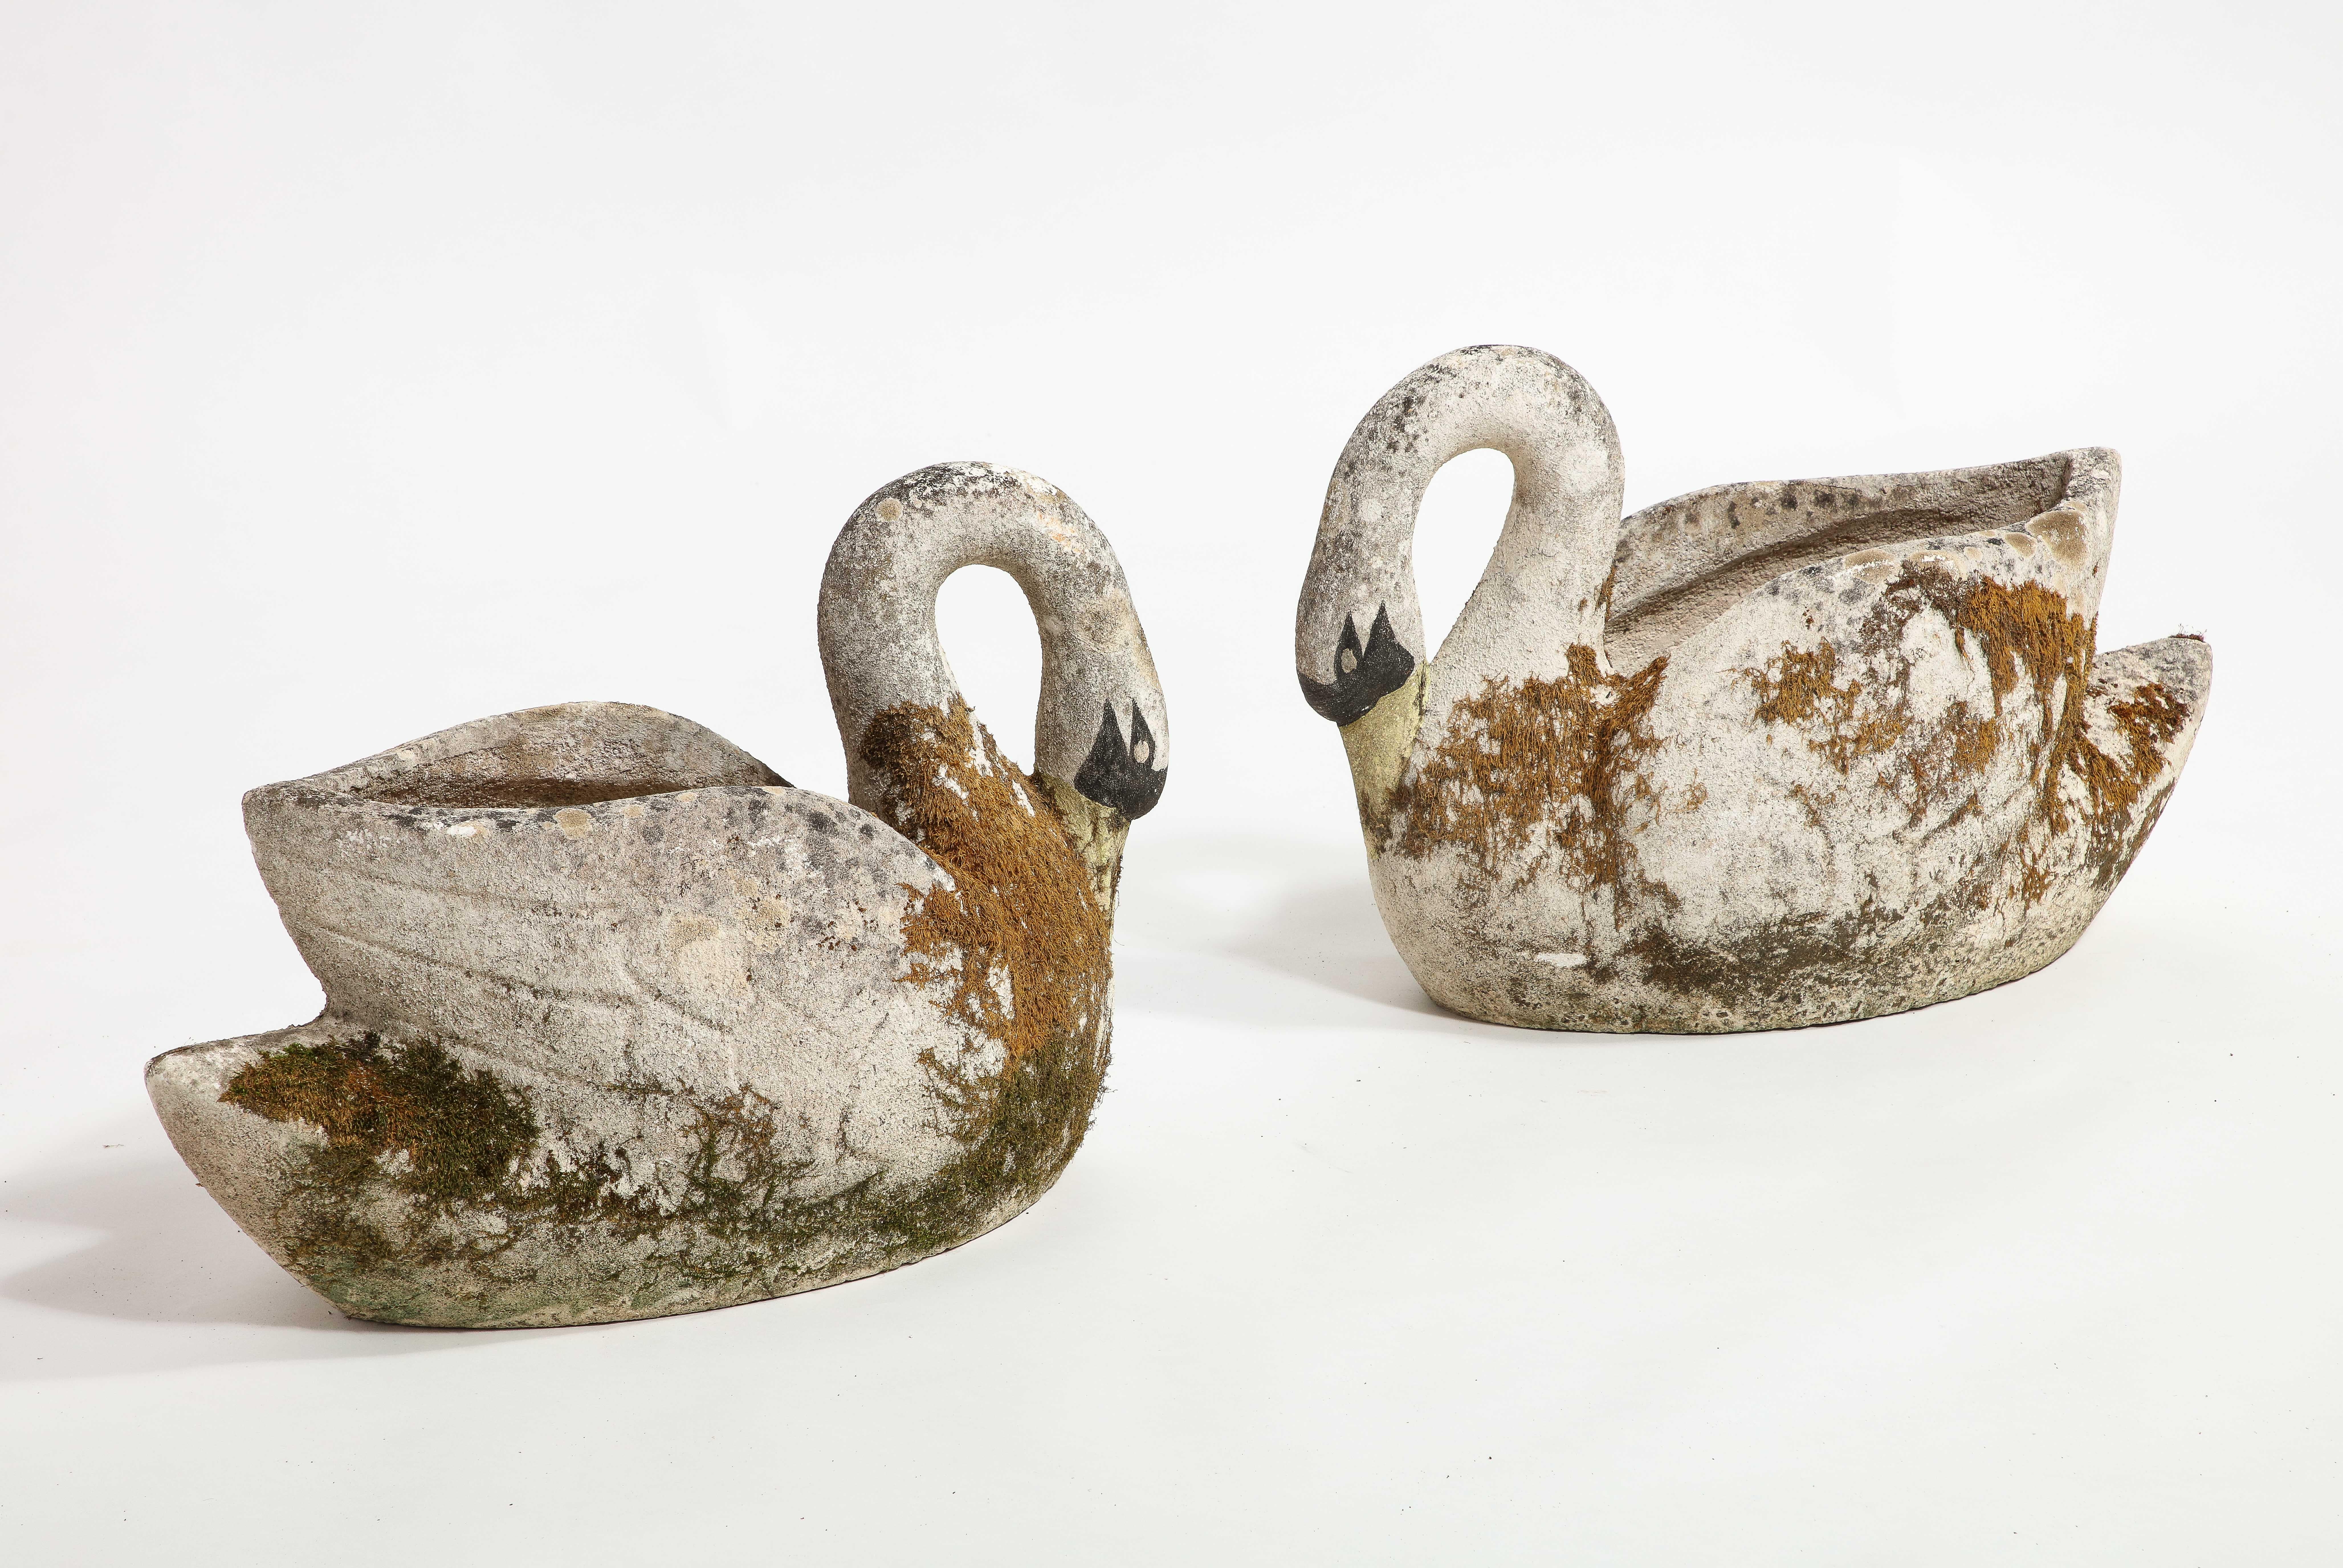 Midcentury French pair of exquisite concrete swan planters or jardinières with curvaceous forms including elegant long curved necks and painted faces and beaks. These lovely vintage swan planters were cast in cement and have beautifully aged through